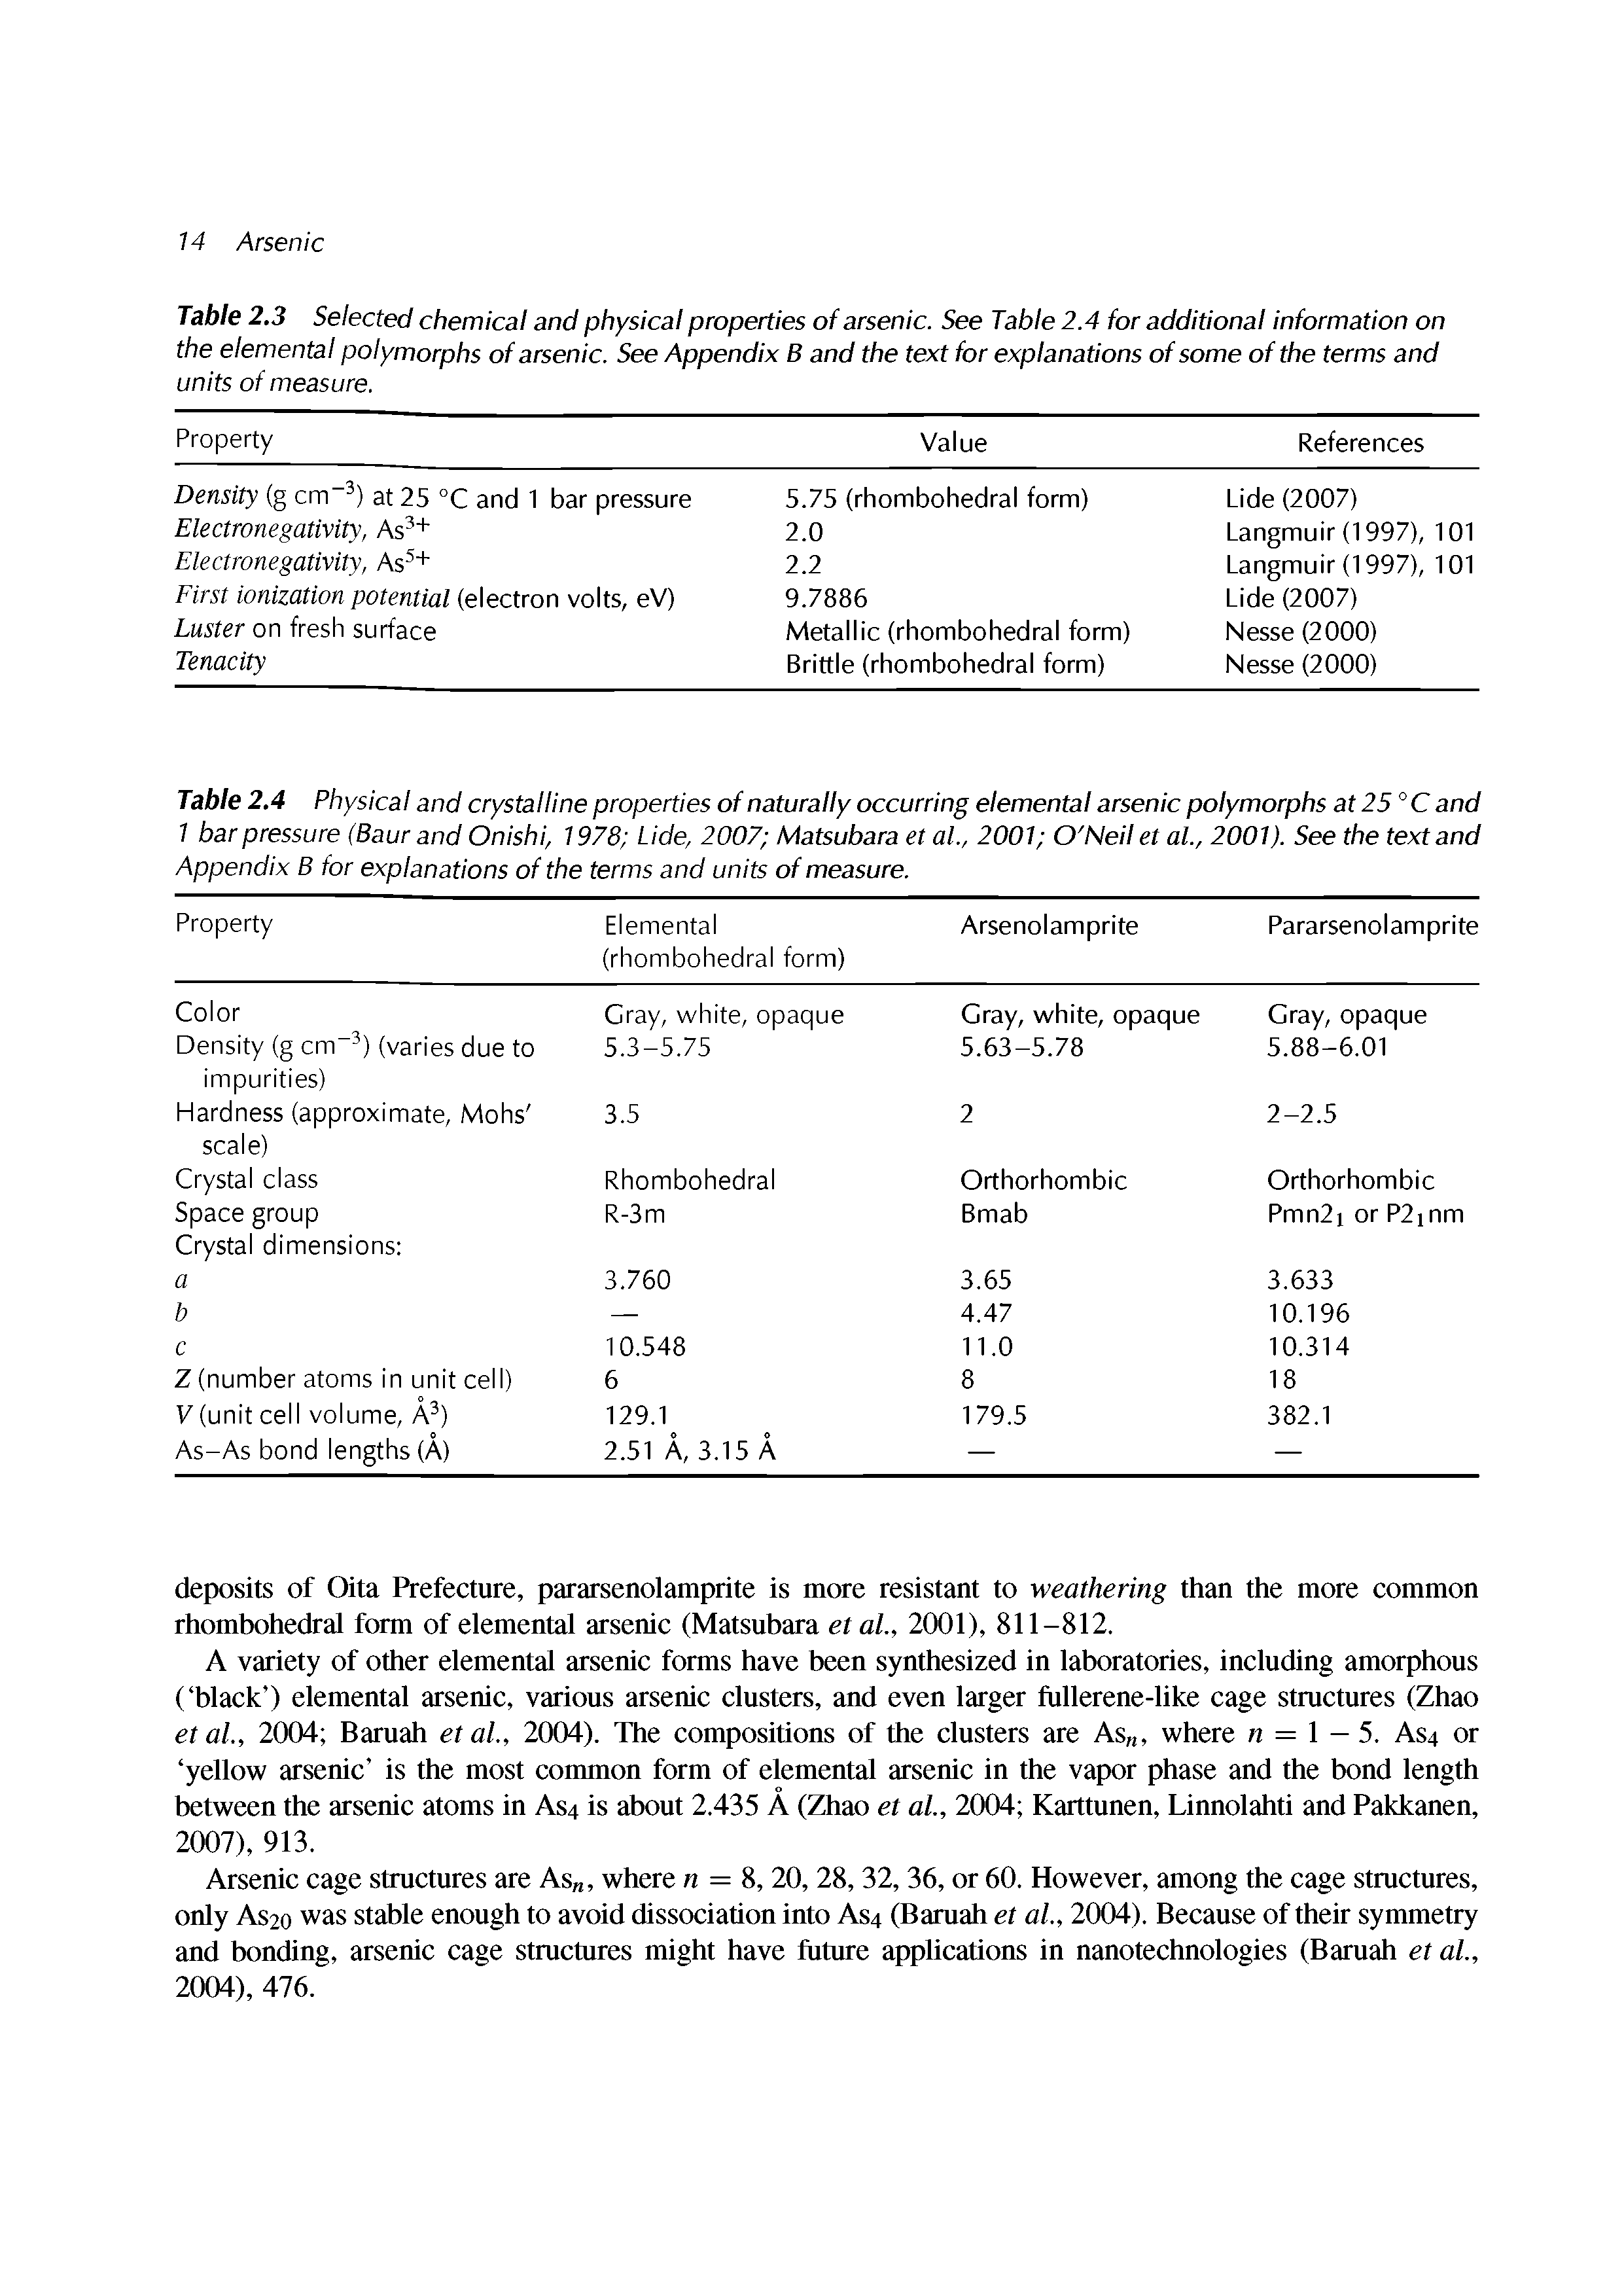 Table 2.4 Physical and crystalline properties of naturally occurring elemental arsenic polymorphs at25°C and 1 bar pressure (Baur and Onishi, 1978 fide, 2007 Matsubara et al., 2001 O Neil et al., 2001). See the text and Appendix B for explanations of the terms and units of measure.